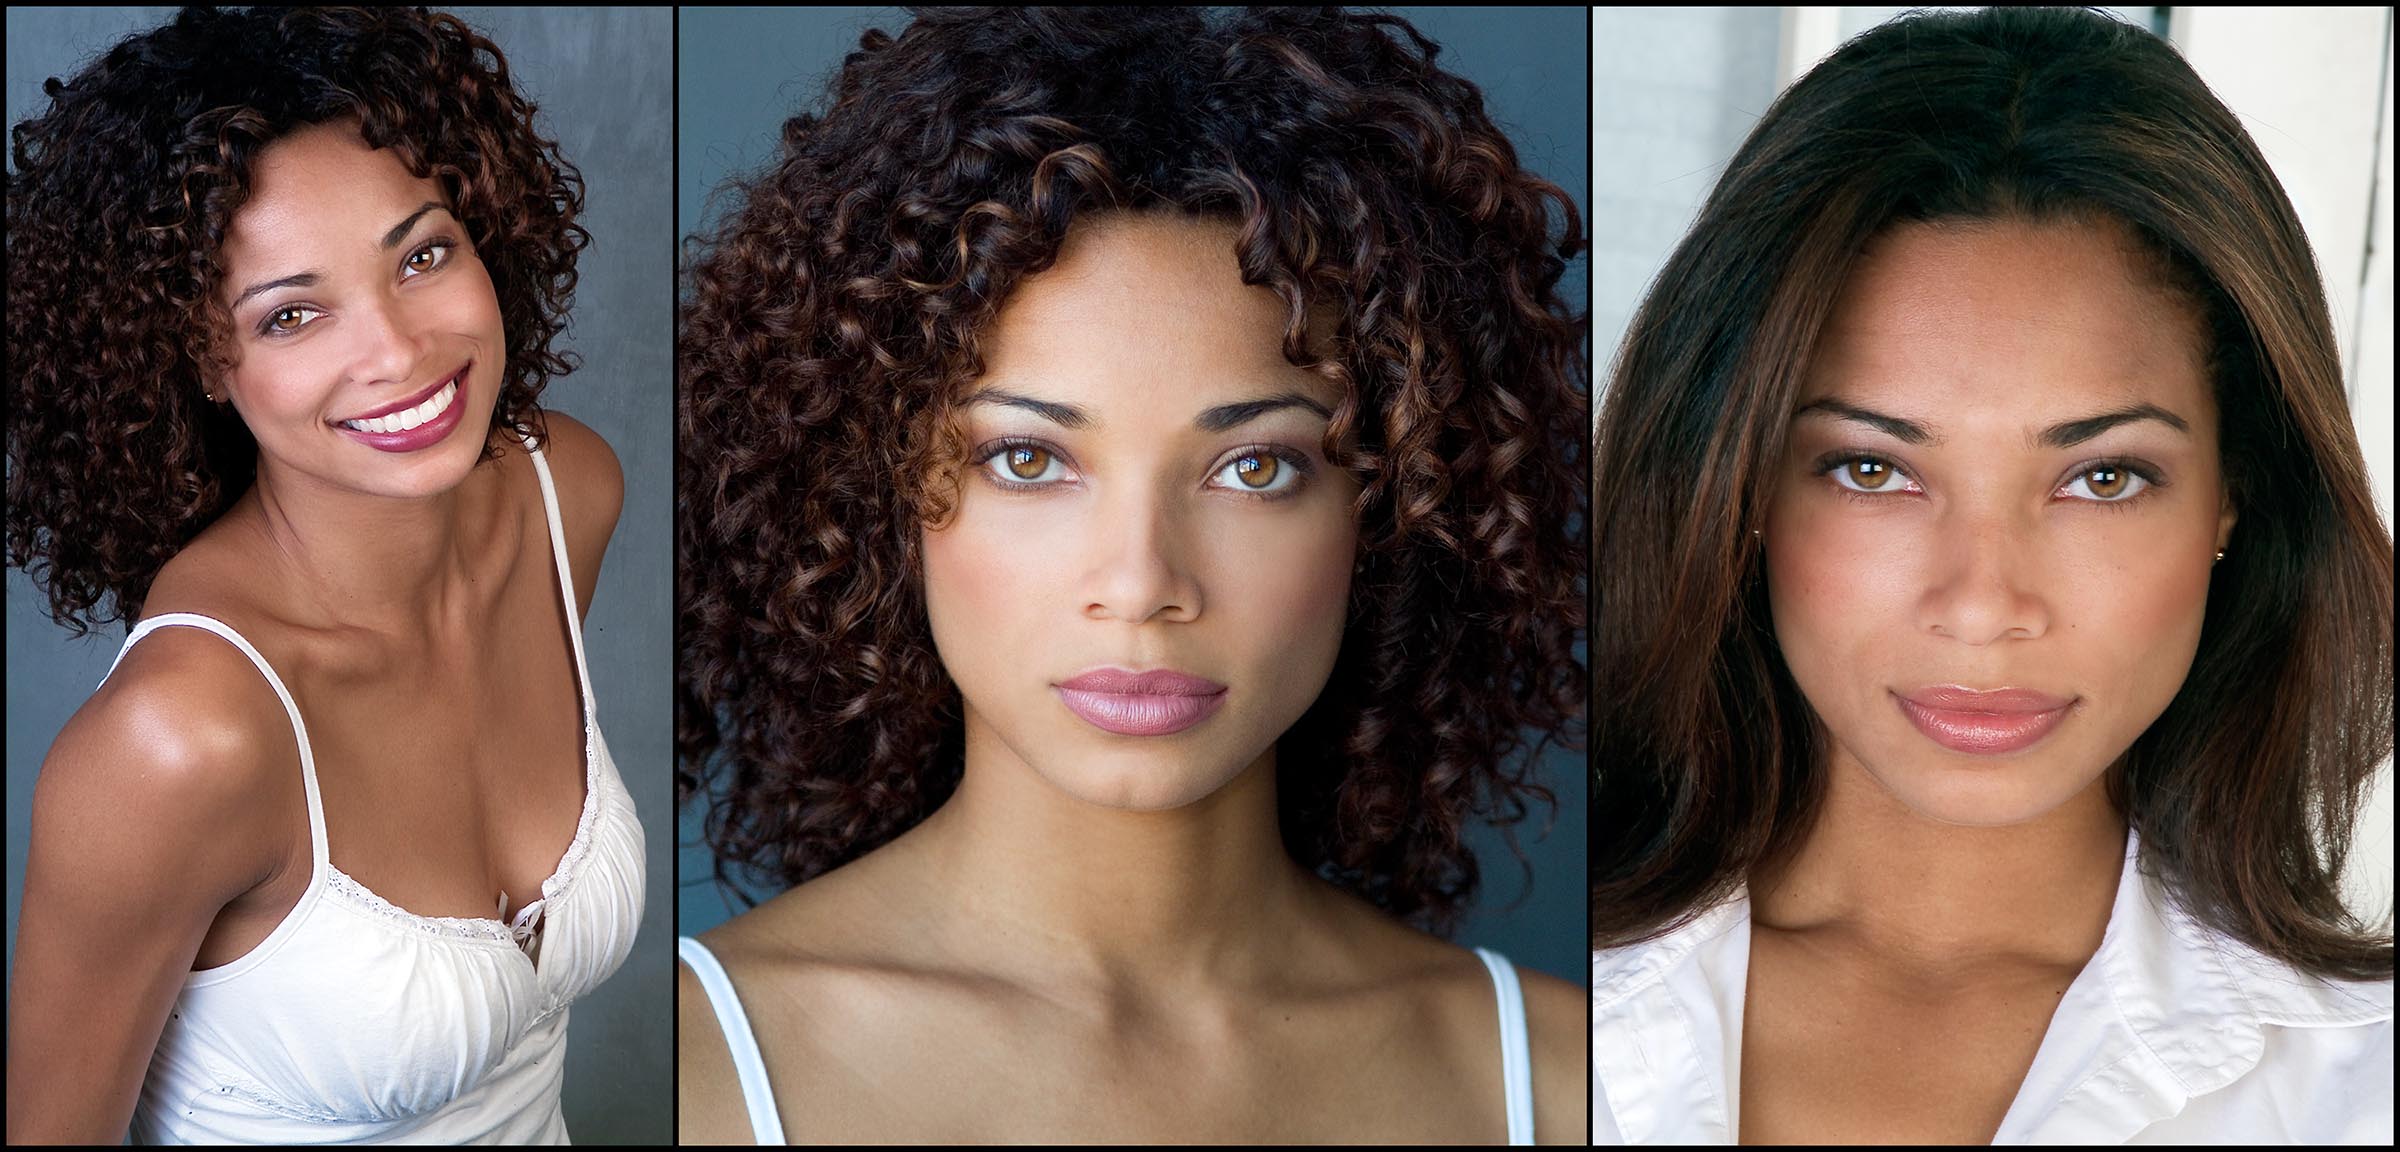 Rochelle Aytes, Headshot session Samples, She became known for her roles in White Chicks and Desperate Housewives. She also played Lisa Breaux in Madea